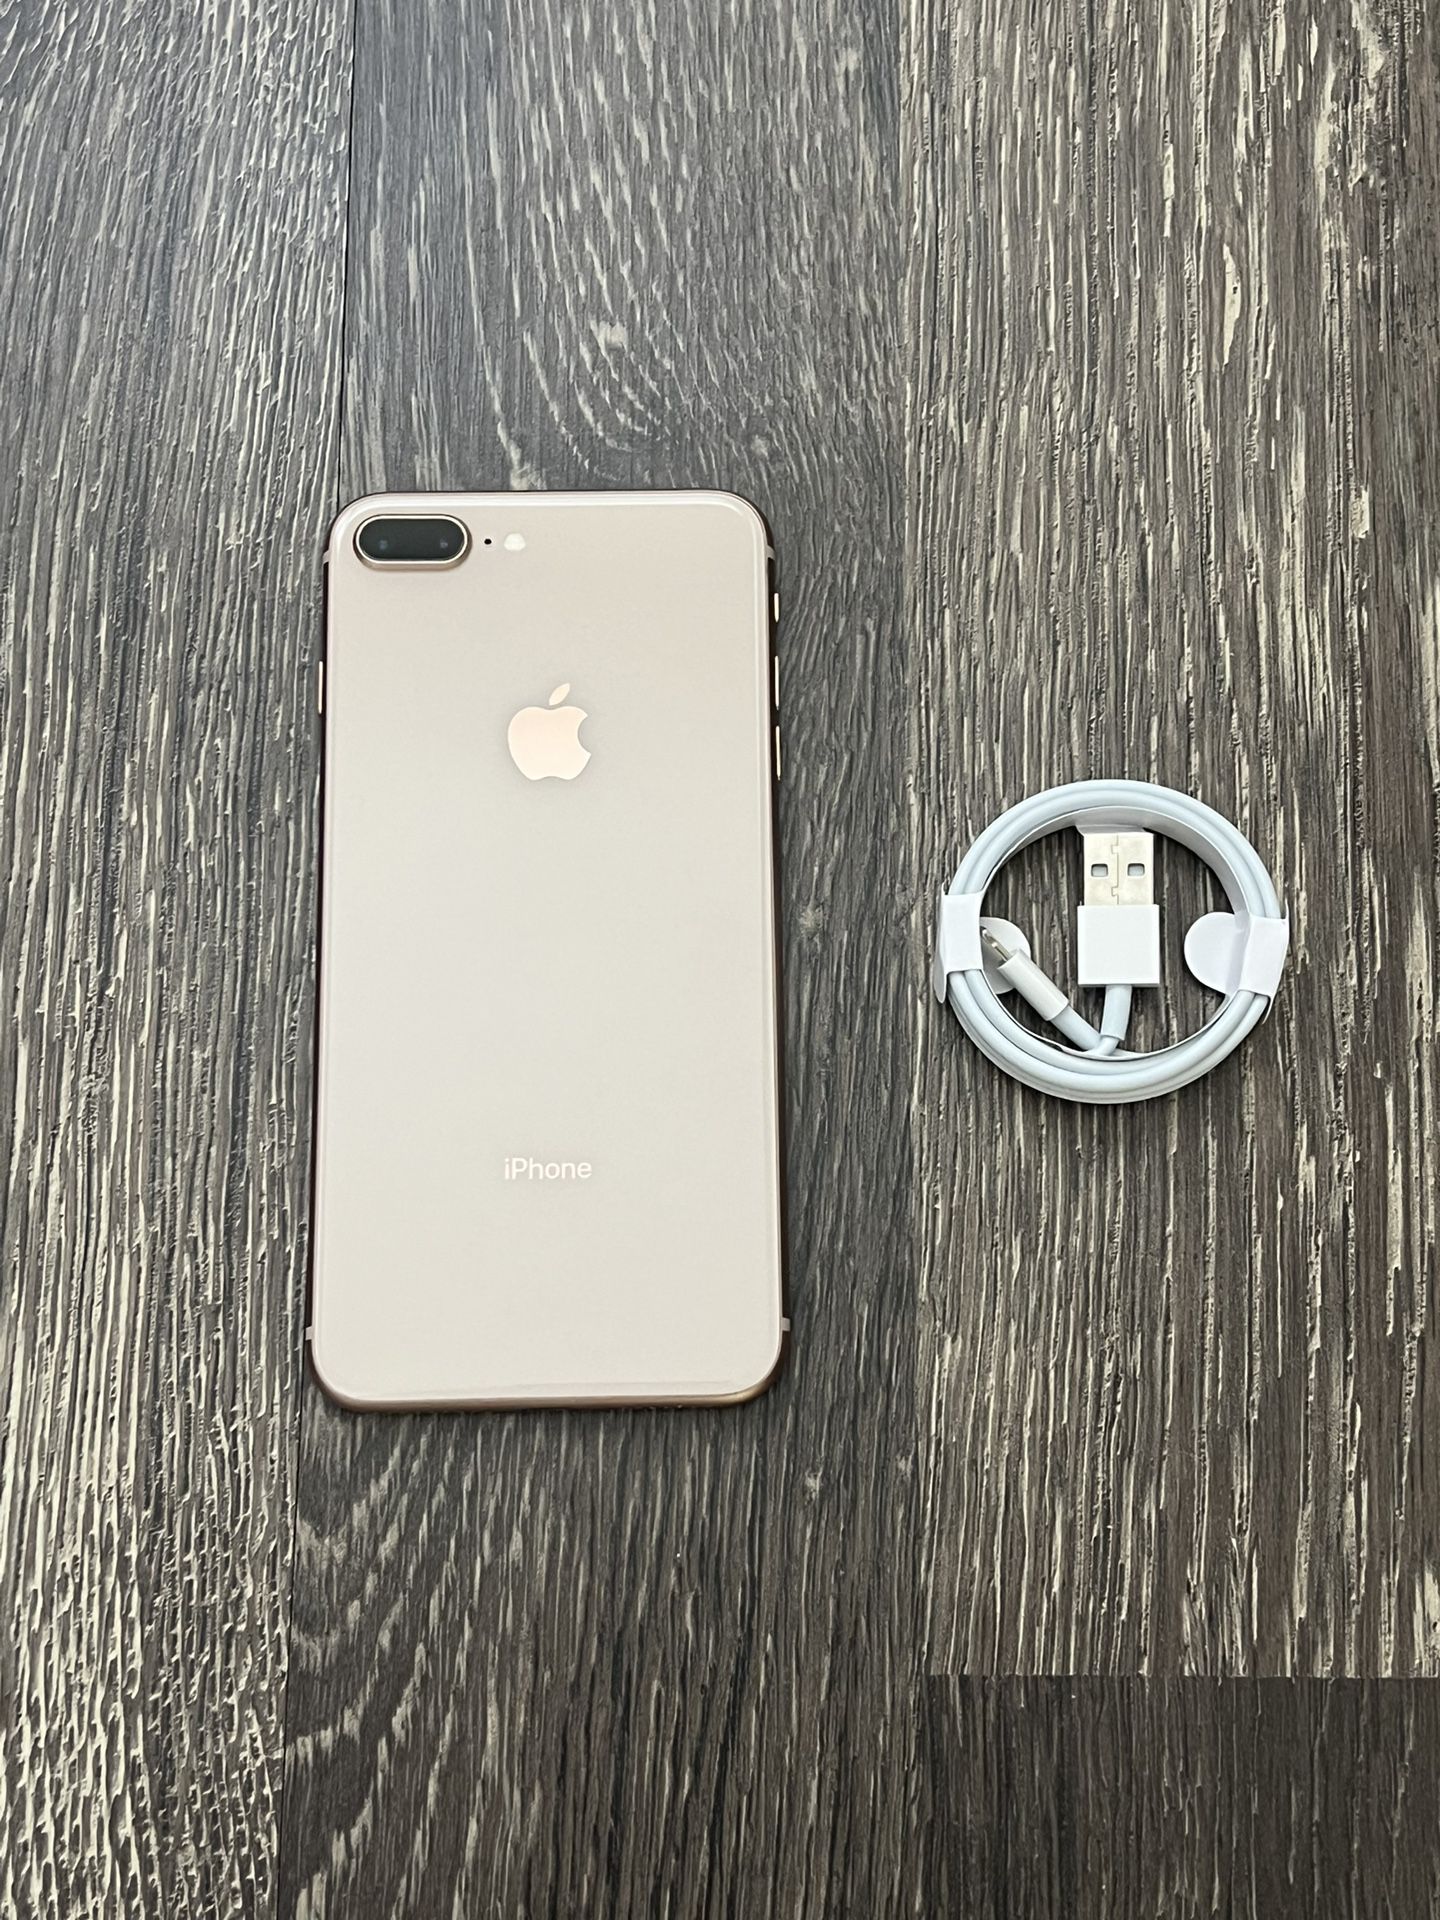 iPhone 8 Plus Gold UNLOCKED FOR ANY CARRIER!